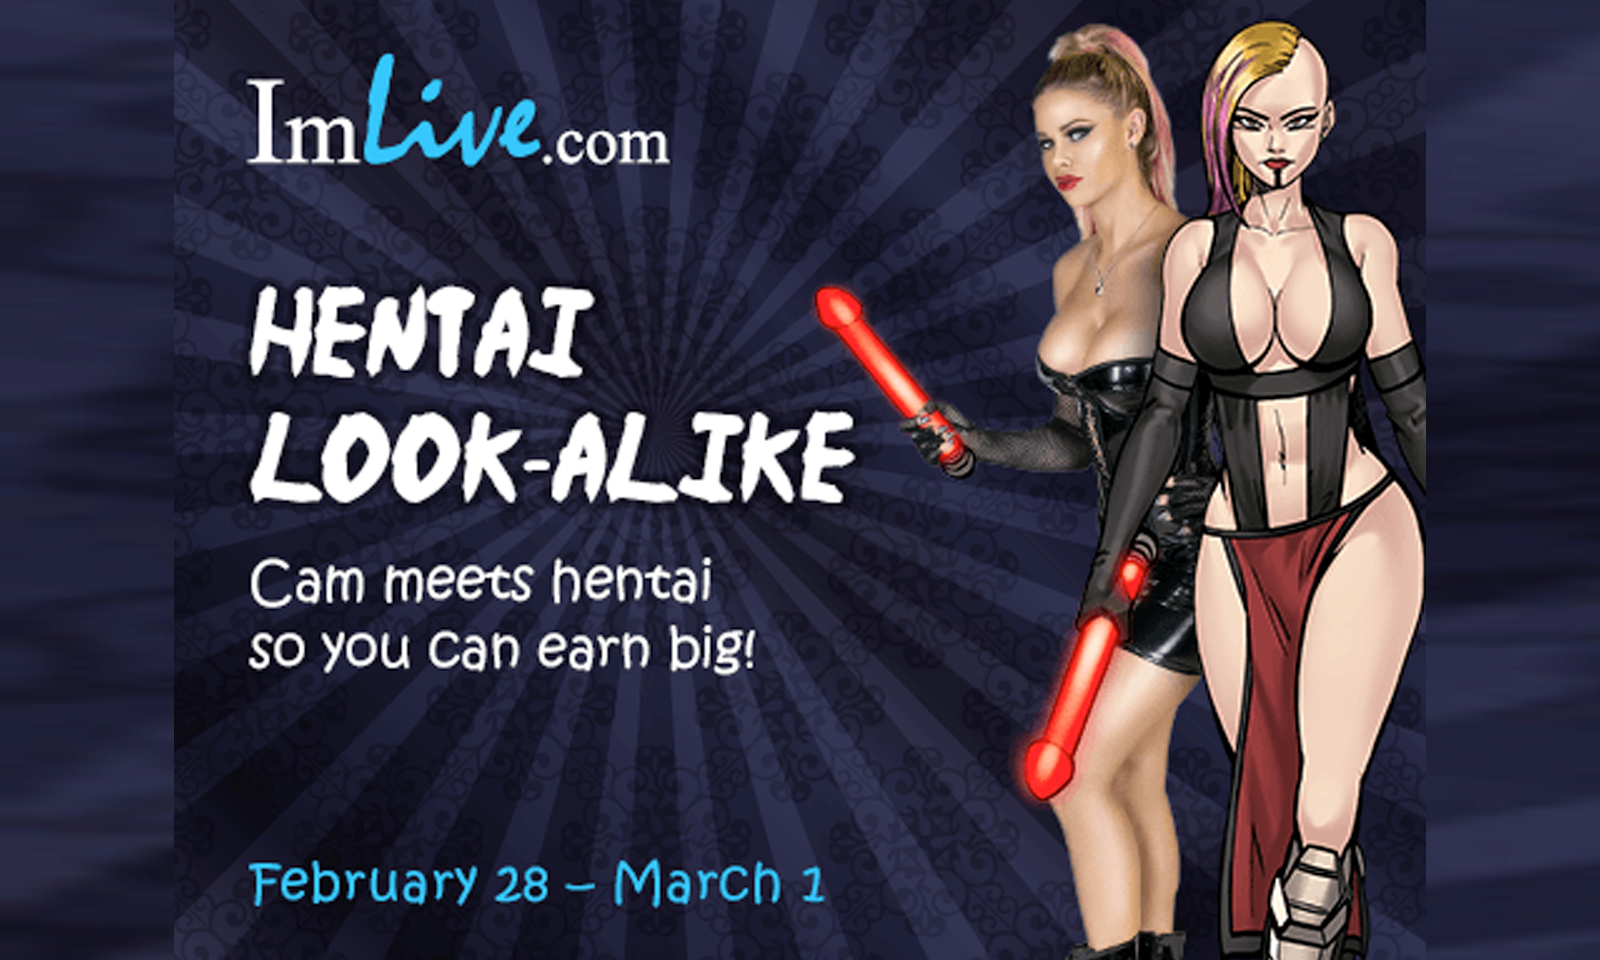 ImLive Delivering A Hentai Event with A Twist